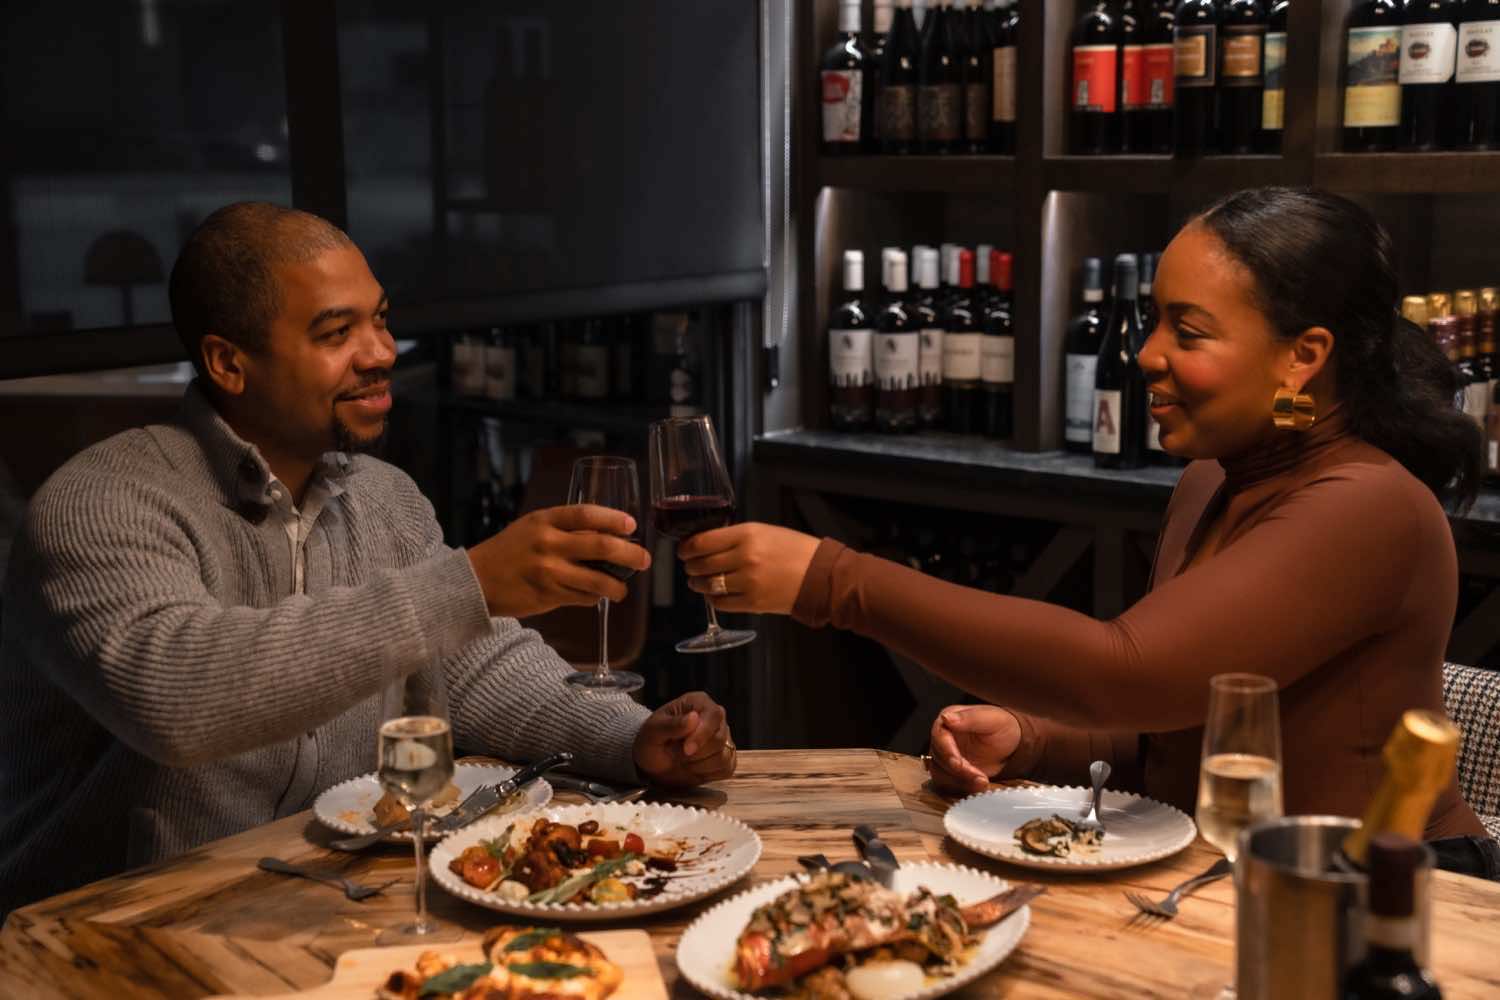 couple touching wine glasses together at a table in a wine bar